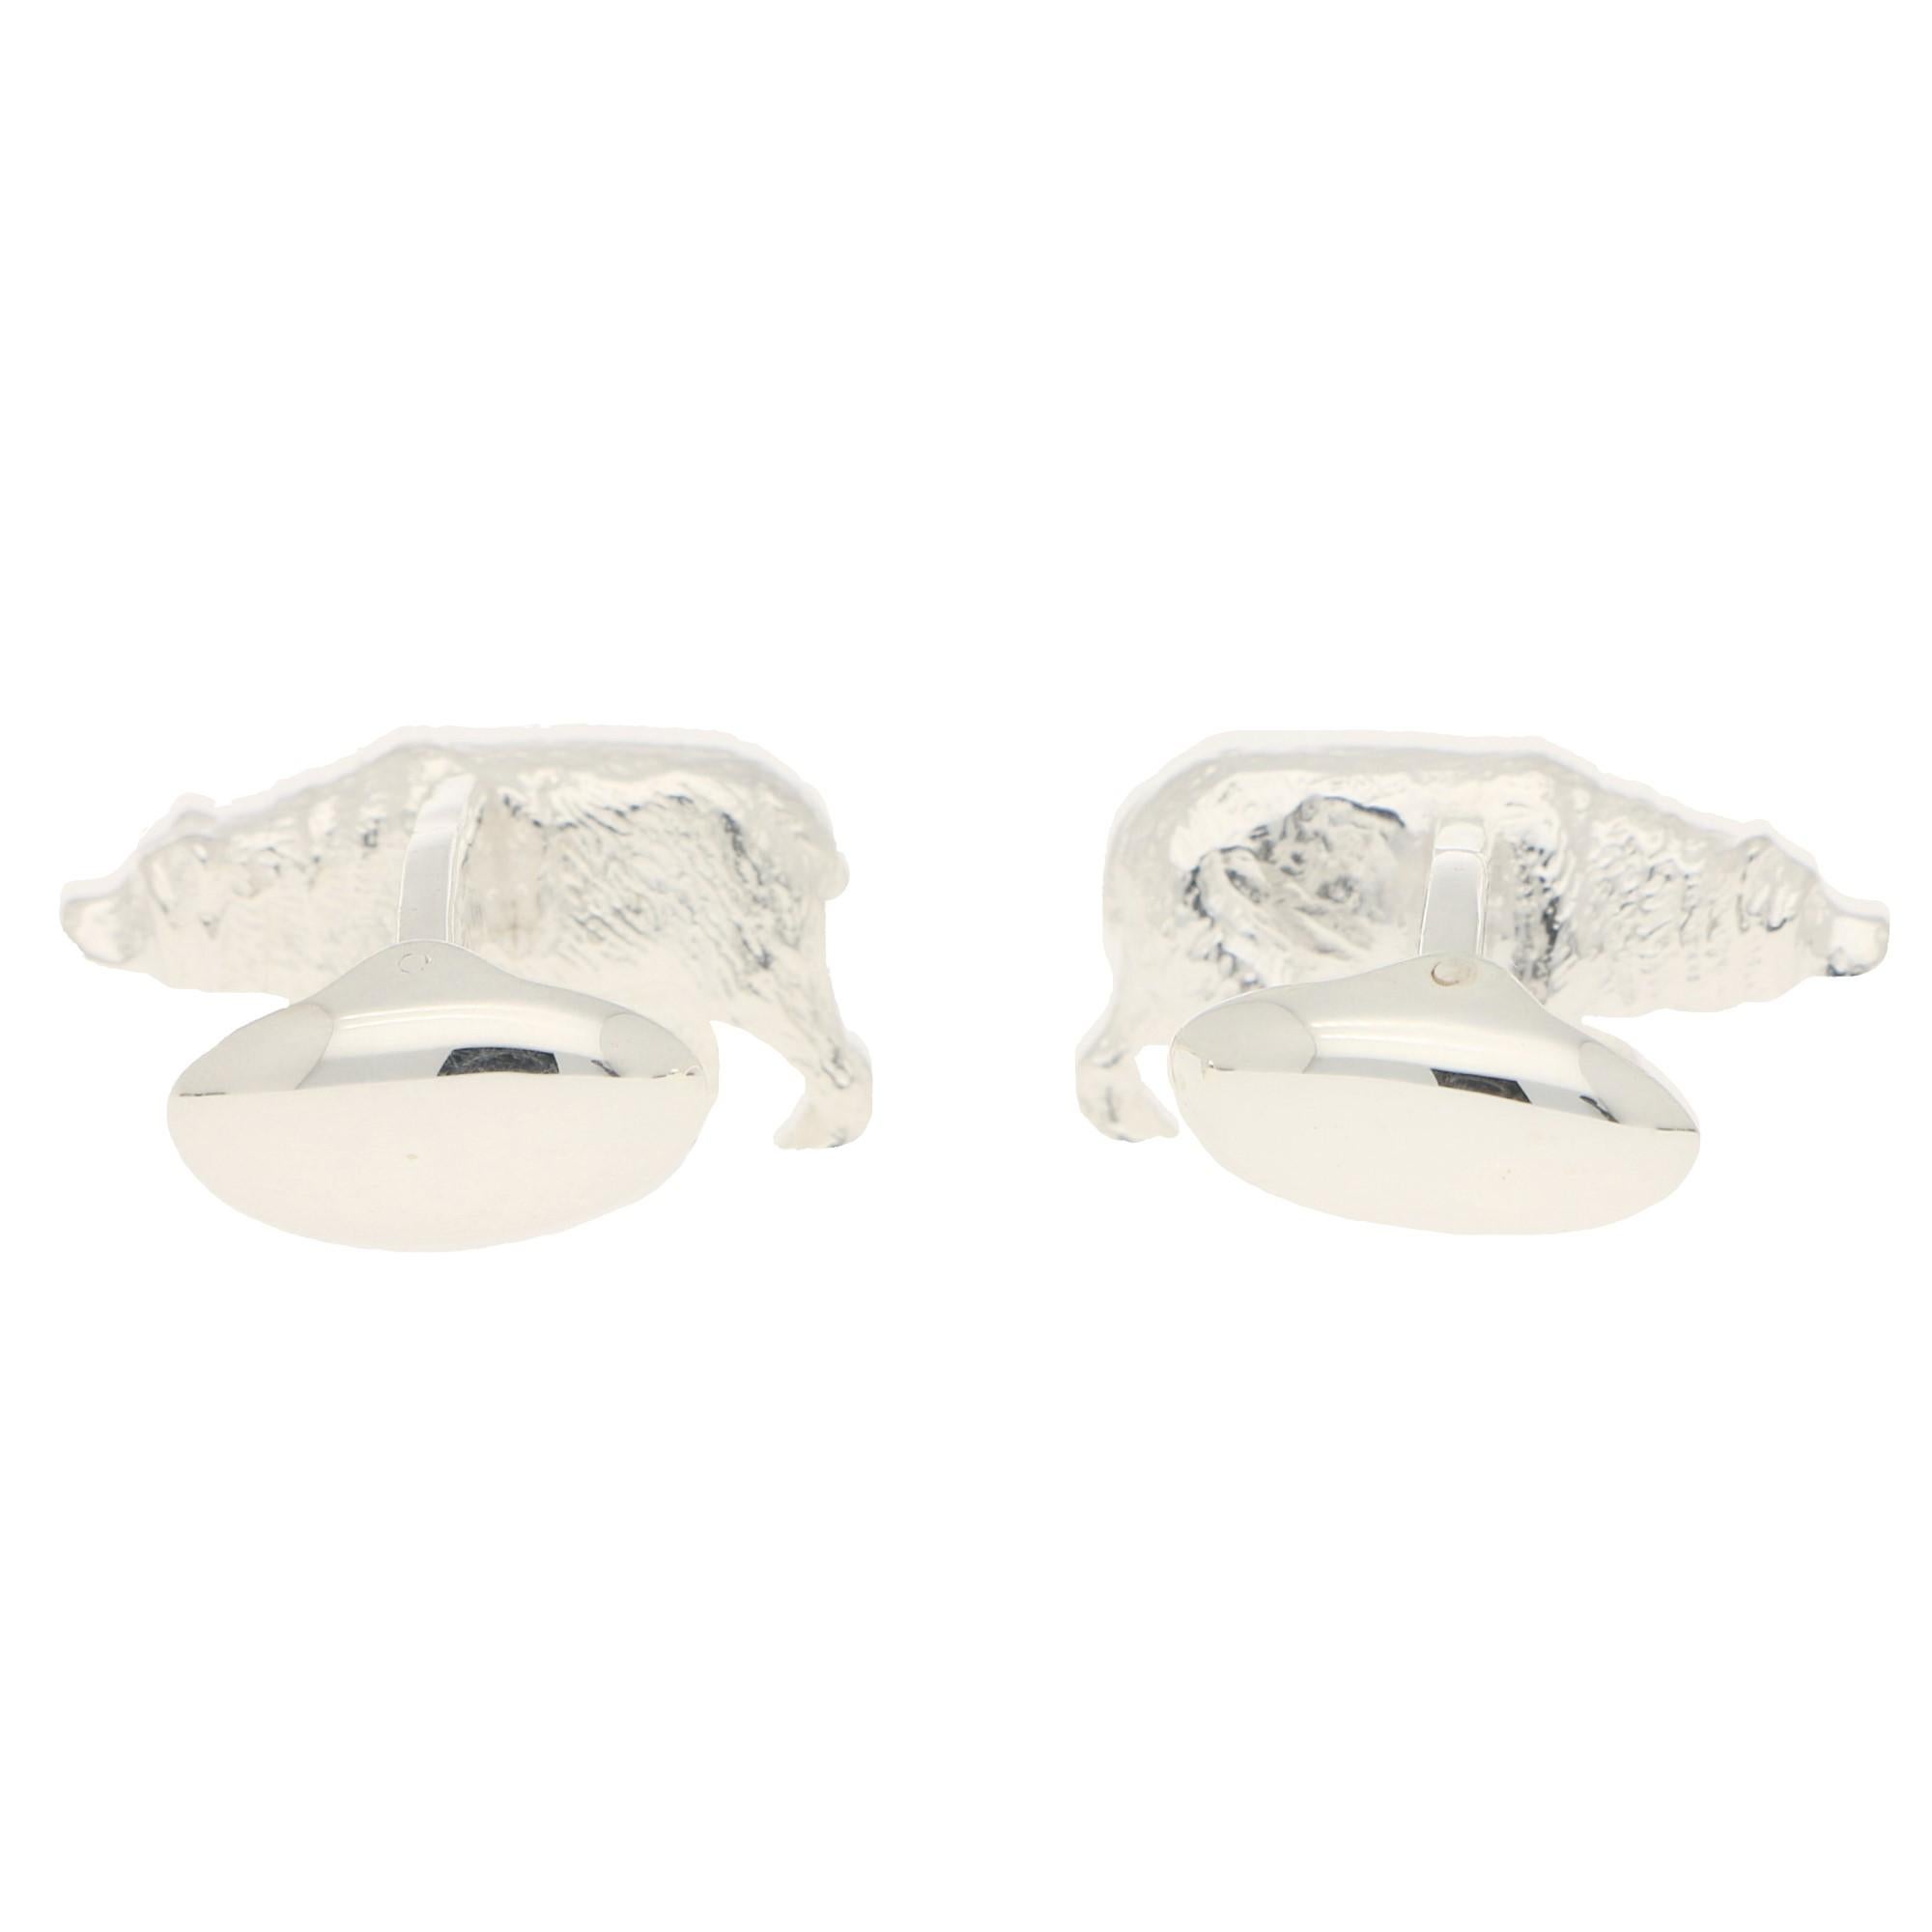 A beautifully detailed pair of bear swivel back cufflinks in solid sterling silver.

Each cufflink depicts a walking bear both going in opposite directions.The bears have been hand crafted and are each individually detailed to highlight the face and